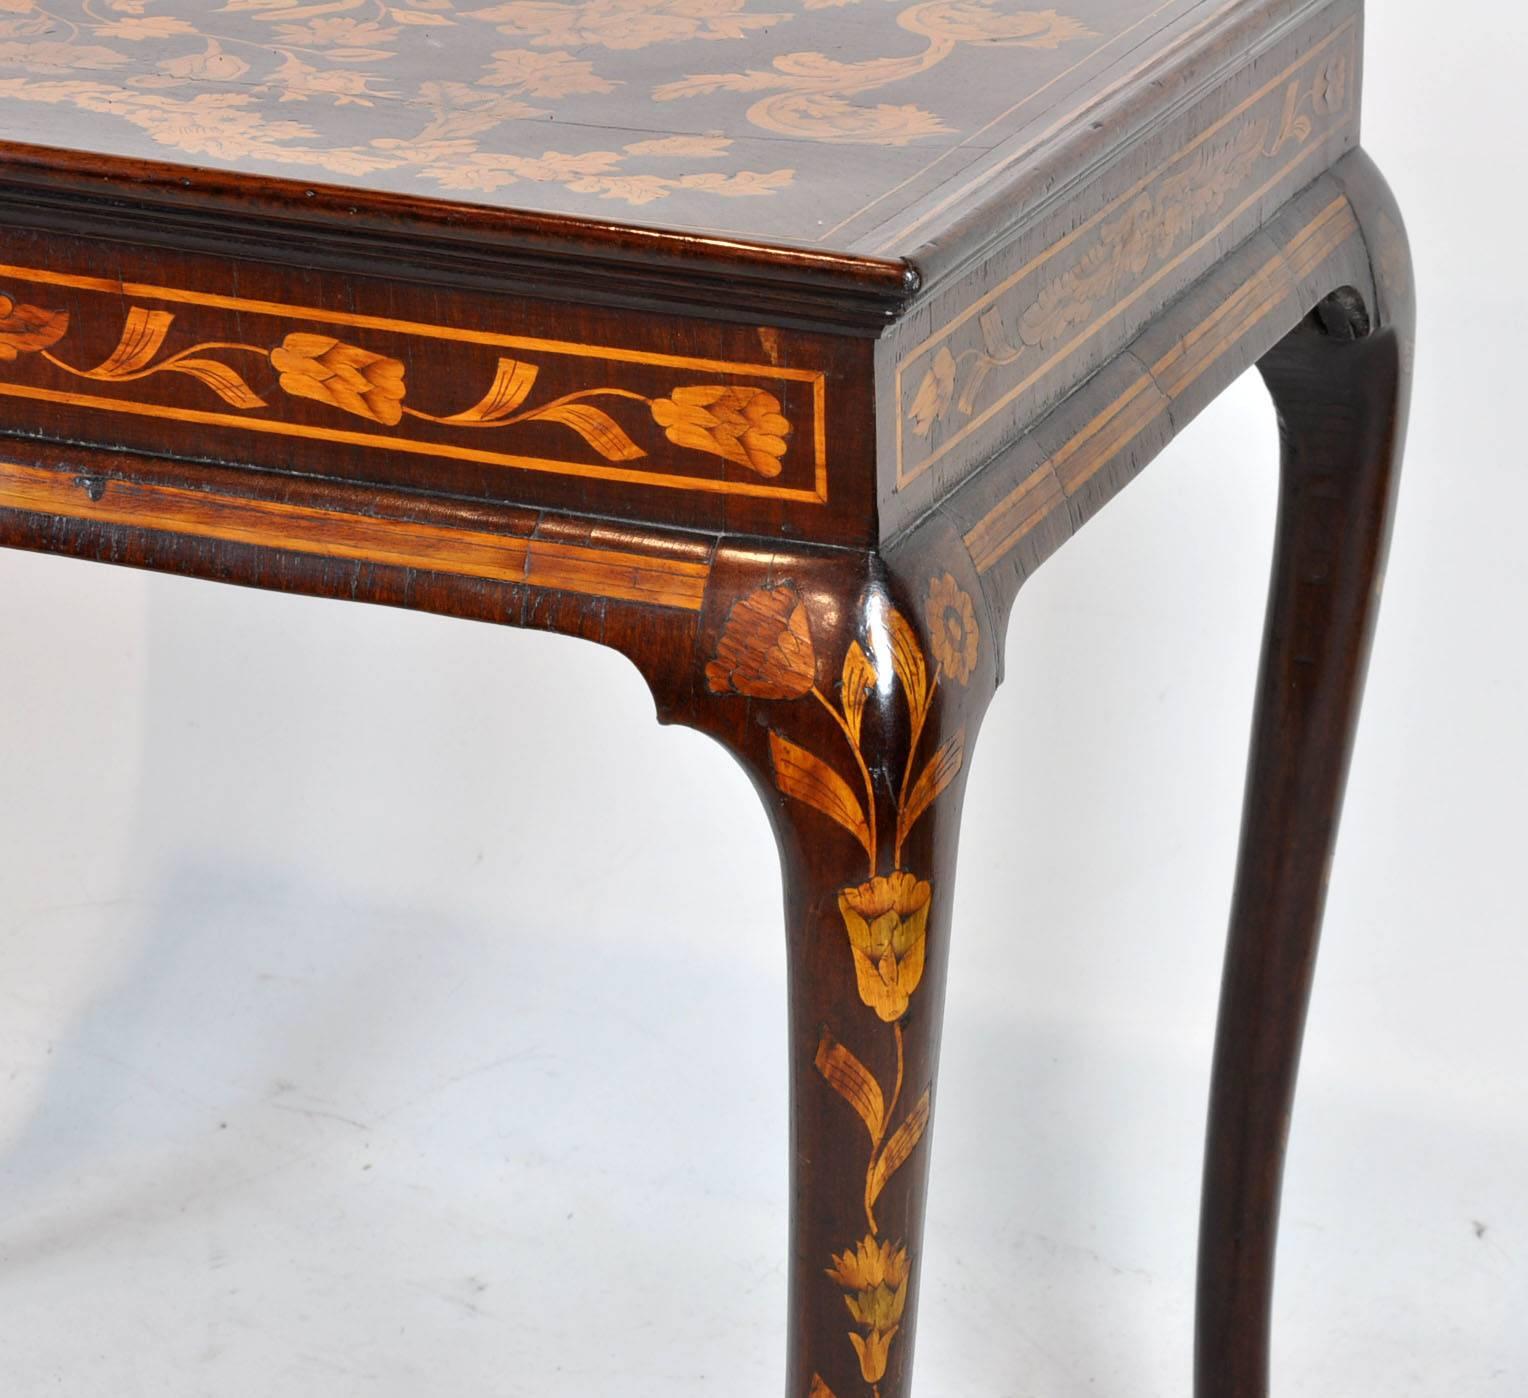 Late 18th century Dutch marquetry queen Anne tea table. Great form and wonderful condition.